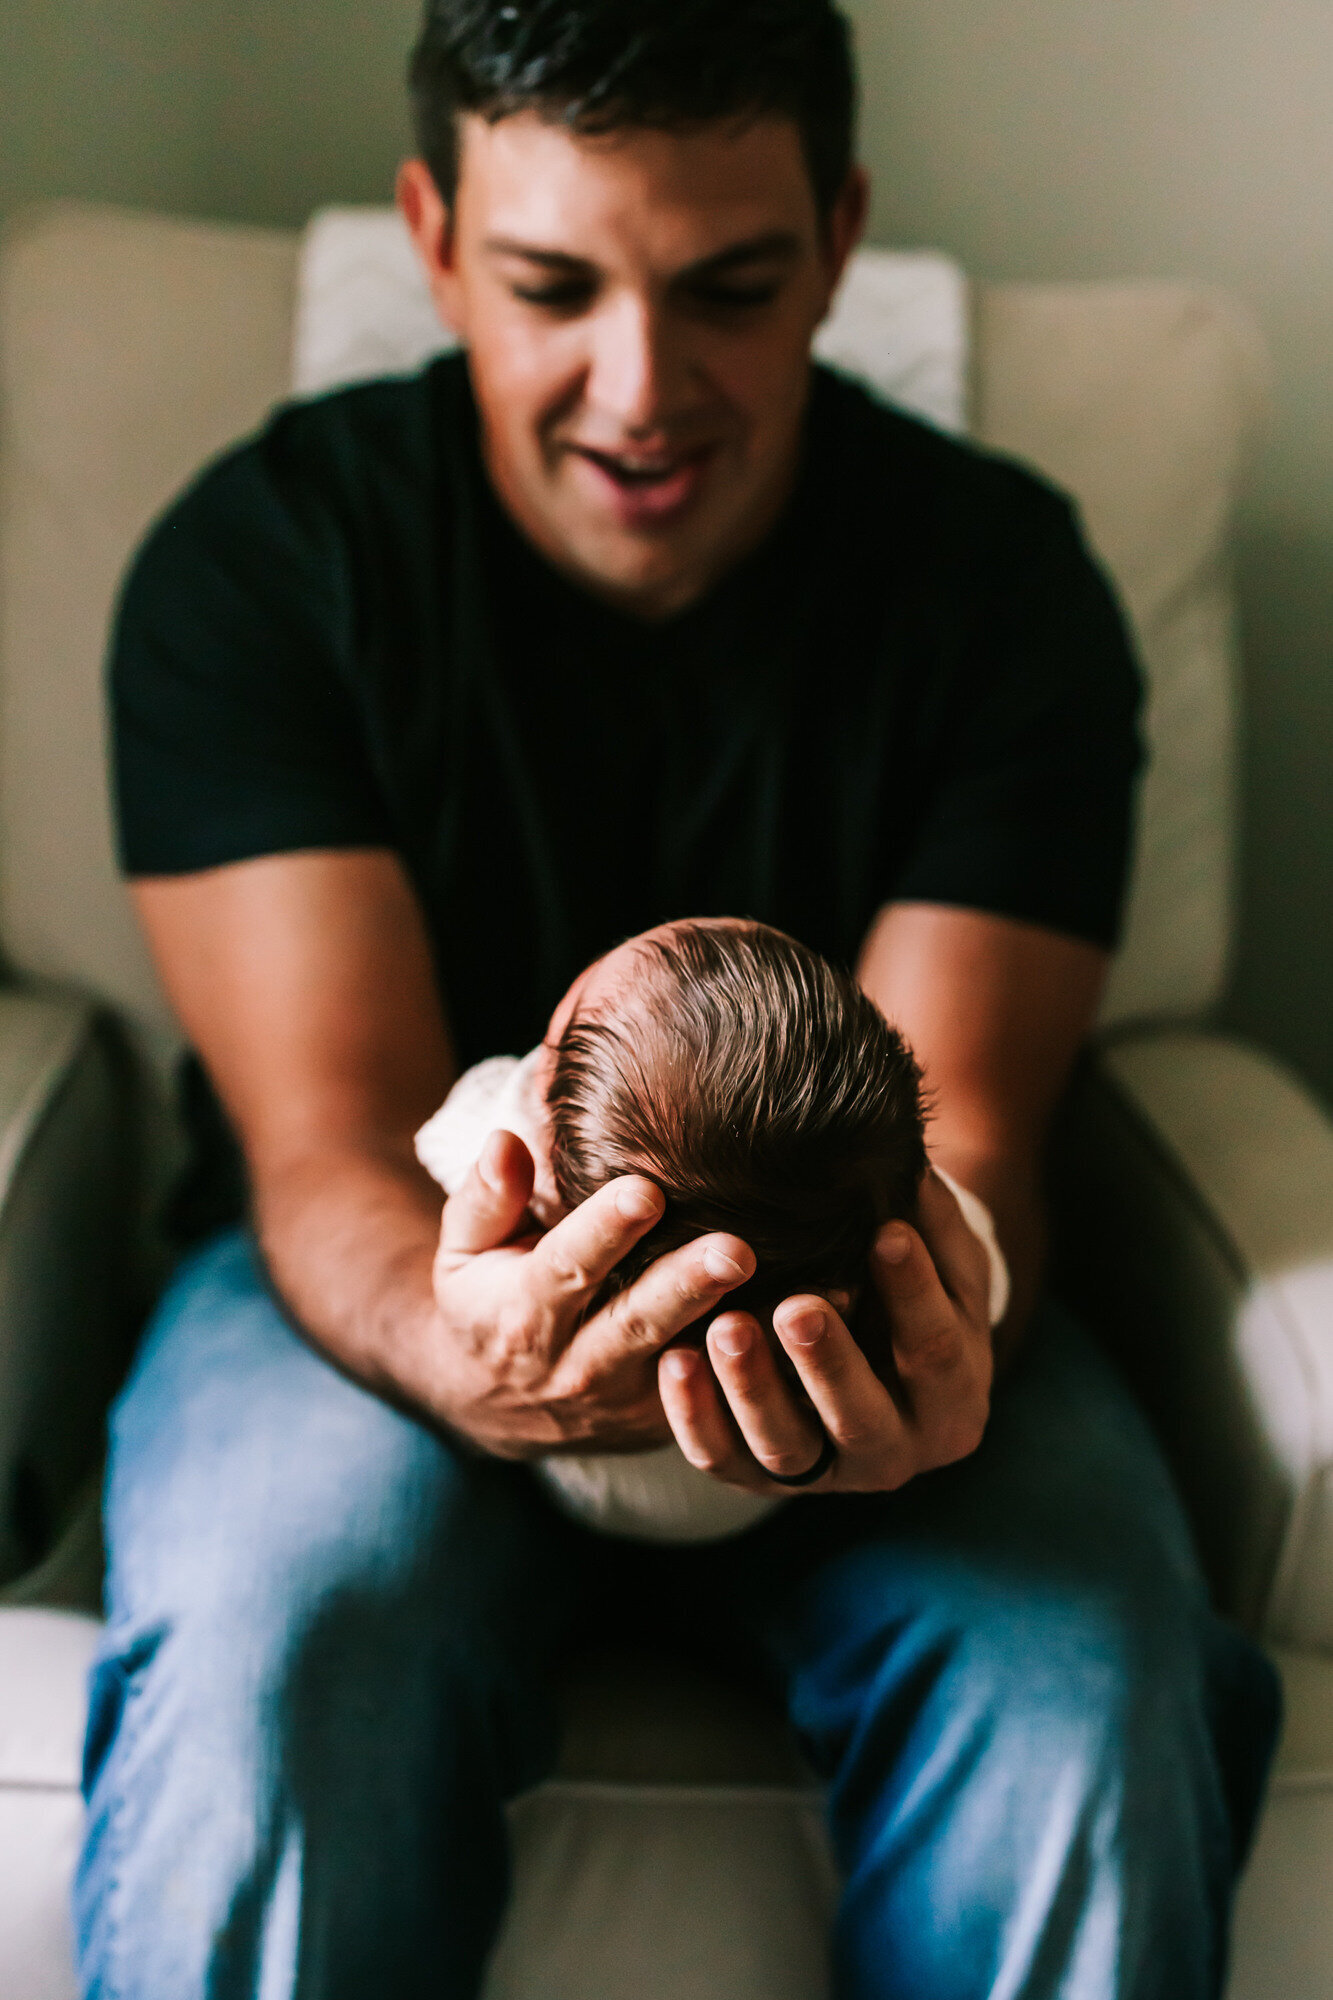 father holding newborn child looking down on child and smiling